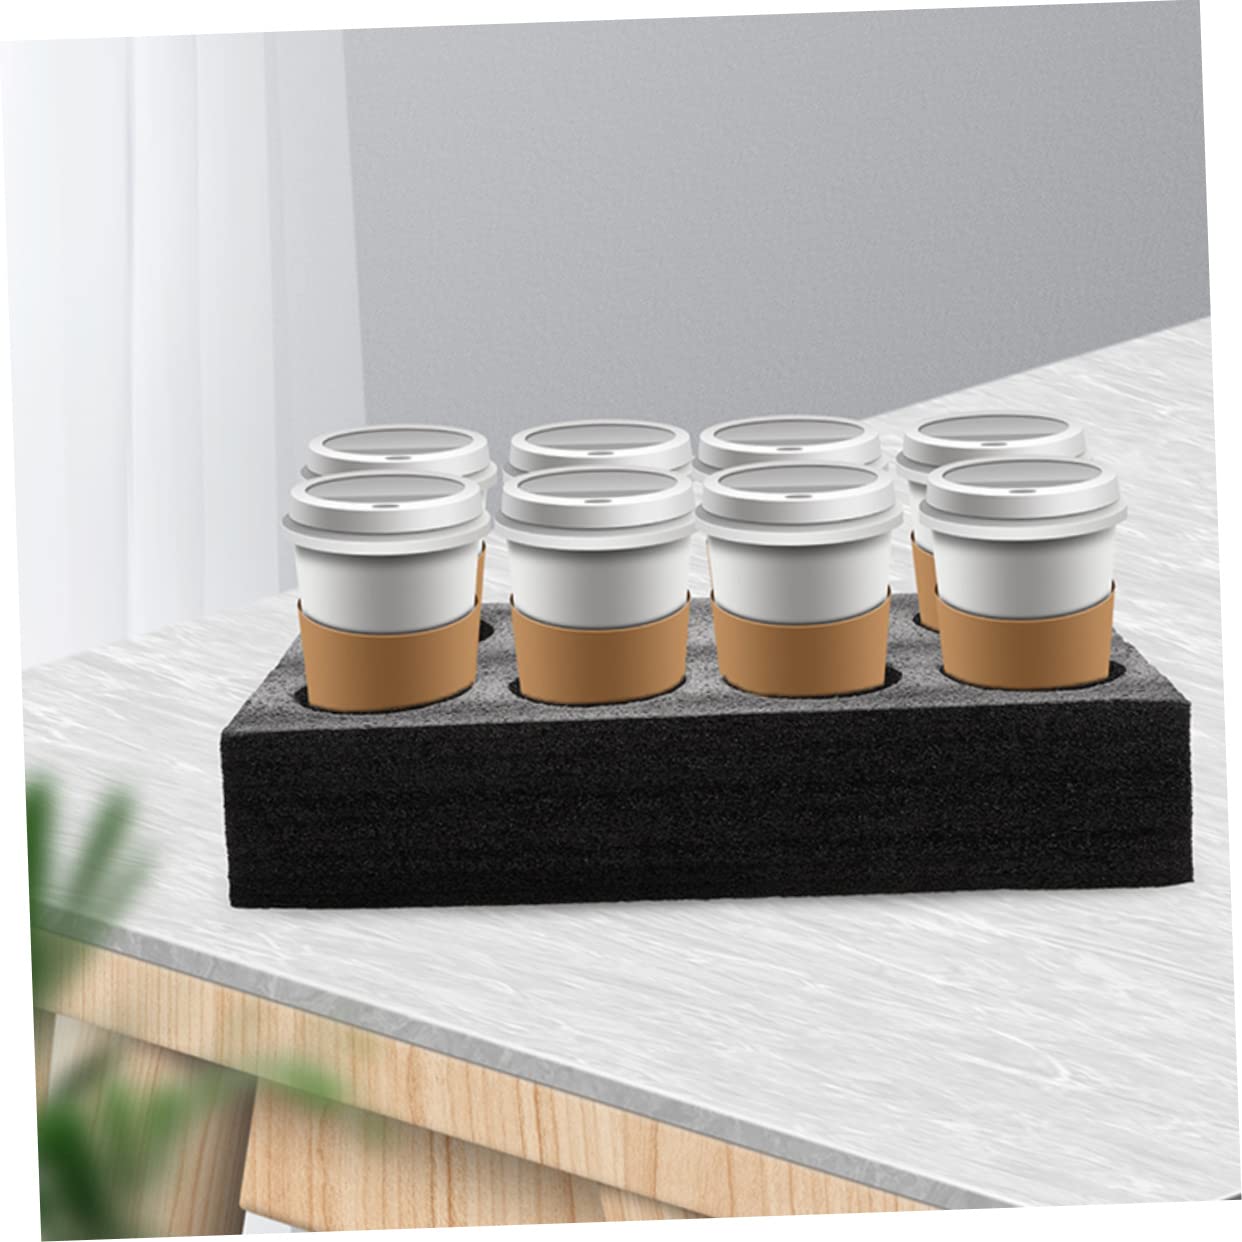 LABRIMP 2pcs Pearl Cotton Cup Holder Drink Carrier Tray Coffee Cup Bottle Carrier Coffee Cup Holders Car Cup Holders Coffee Tray Milk Tea Packing Tray Fixture Epe Pearl Cotton Foam Drinks